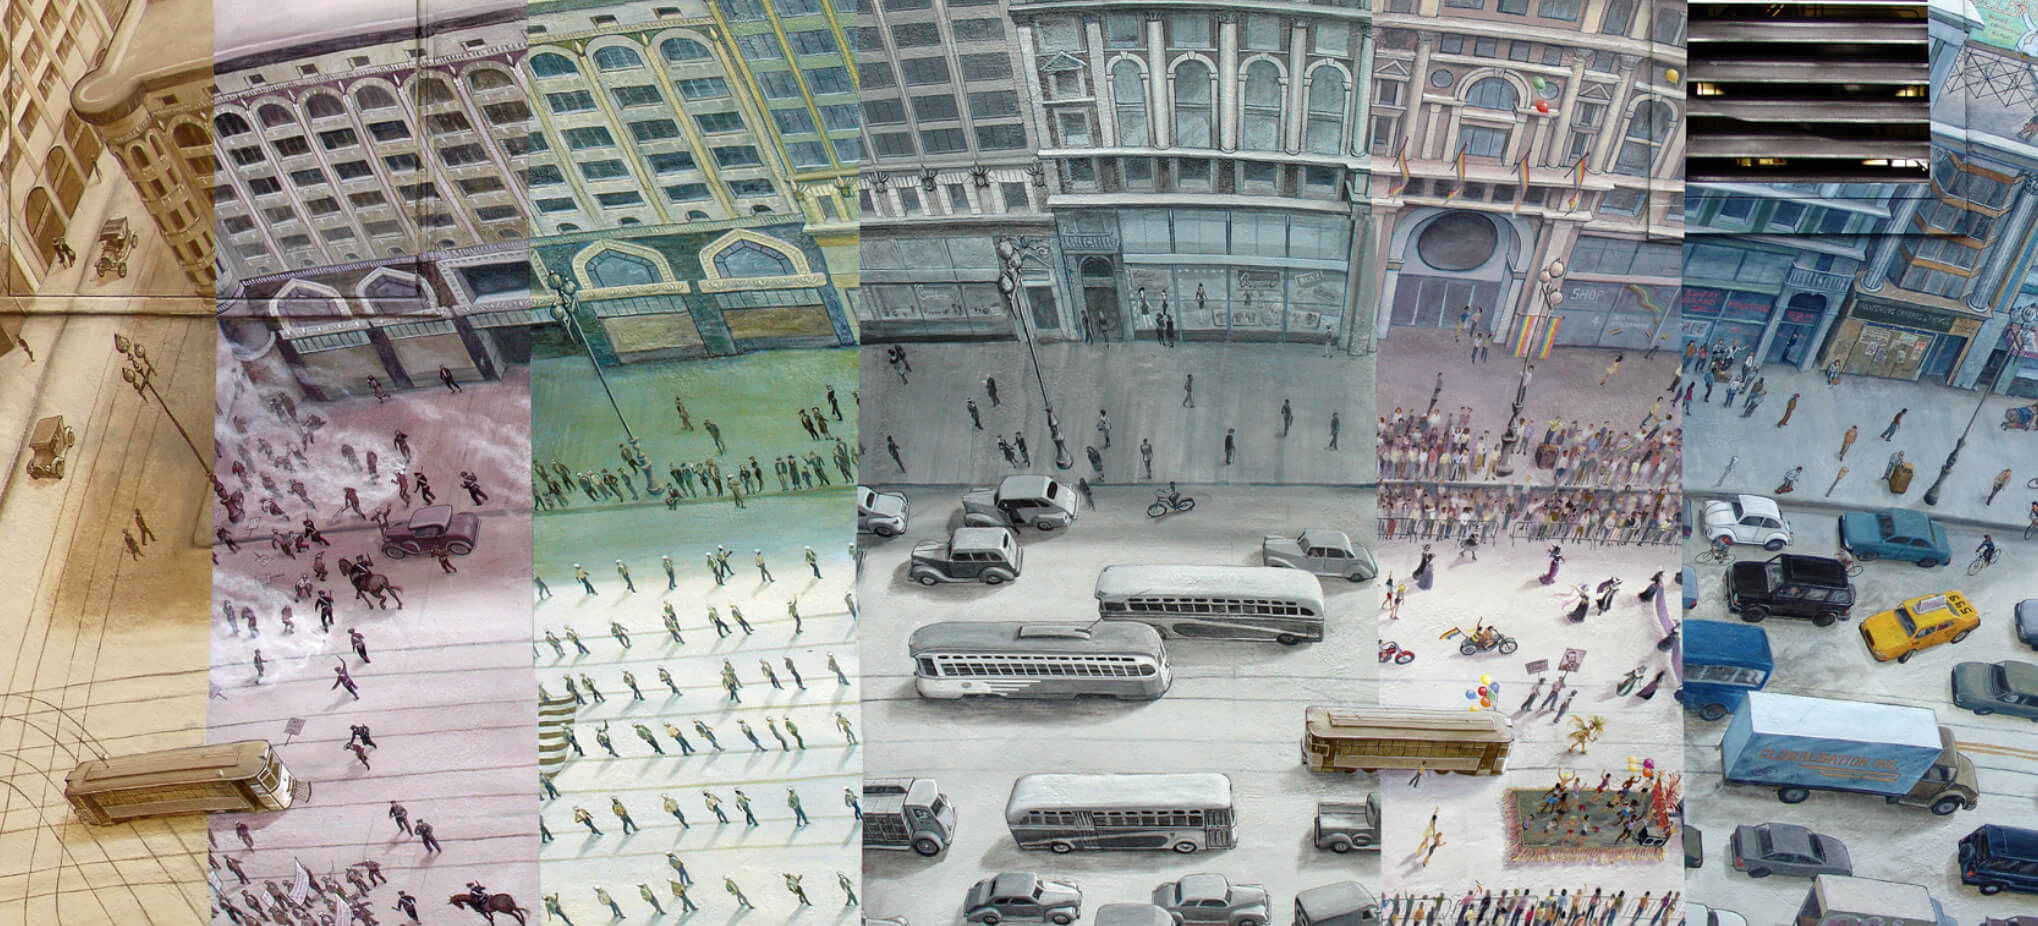 View of the different panels featured on the Market Street Railway mural